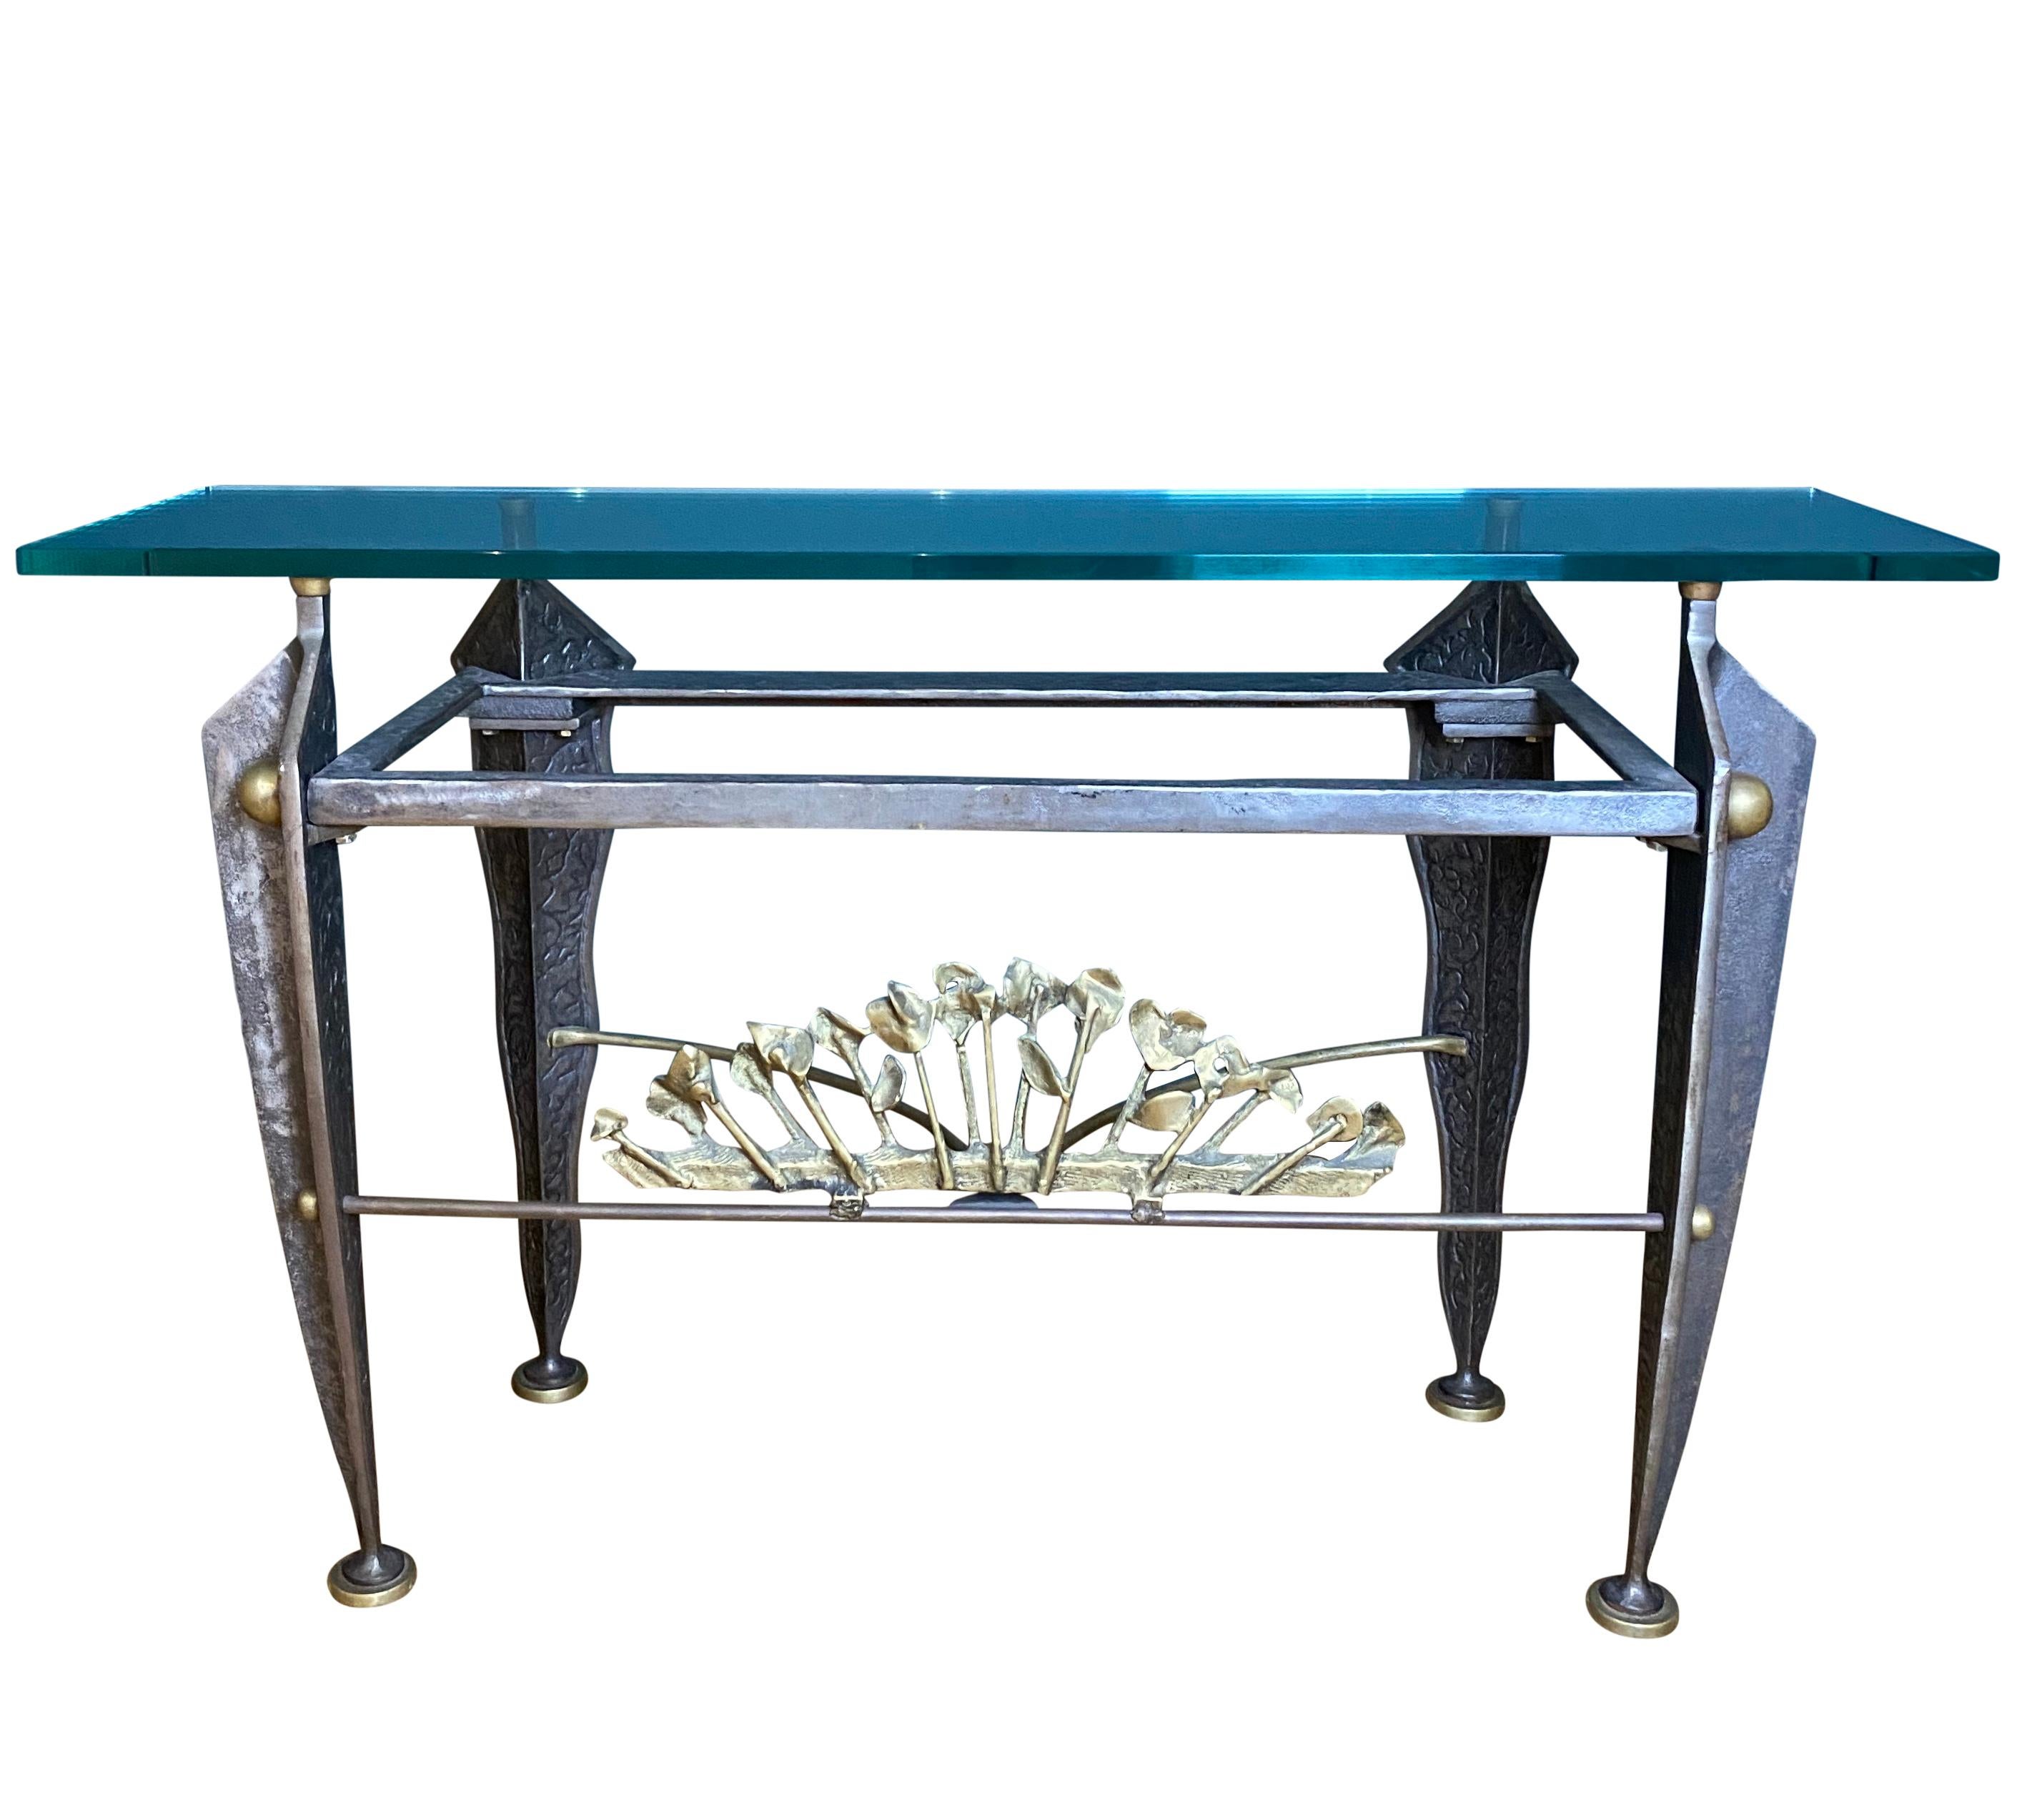 A heavy sculptural console table featuring a fan of lilies in gilded bronze, supported by four hand hammered legs with exceptional detailing.

Measures: Glass top W: 125cm, D: 34cm, thickness: 2cm.